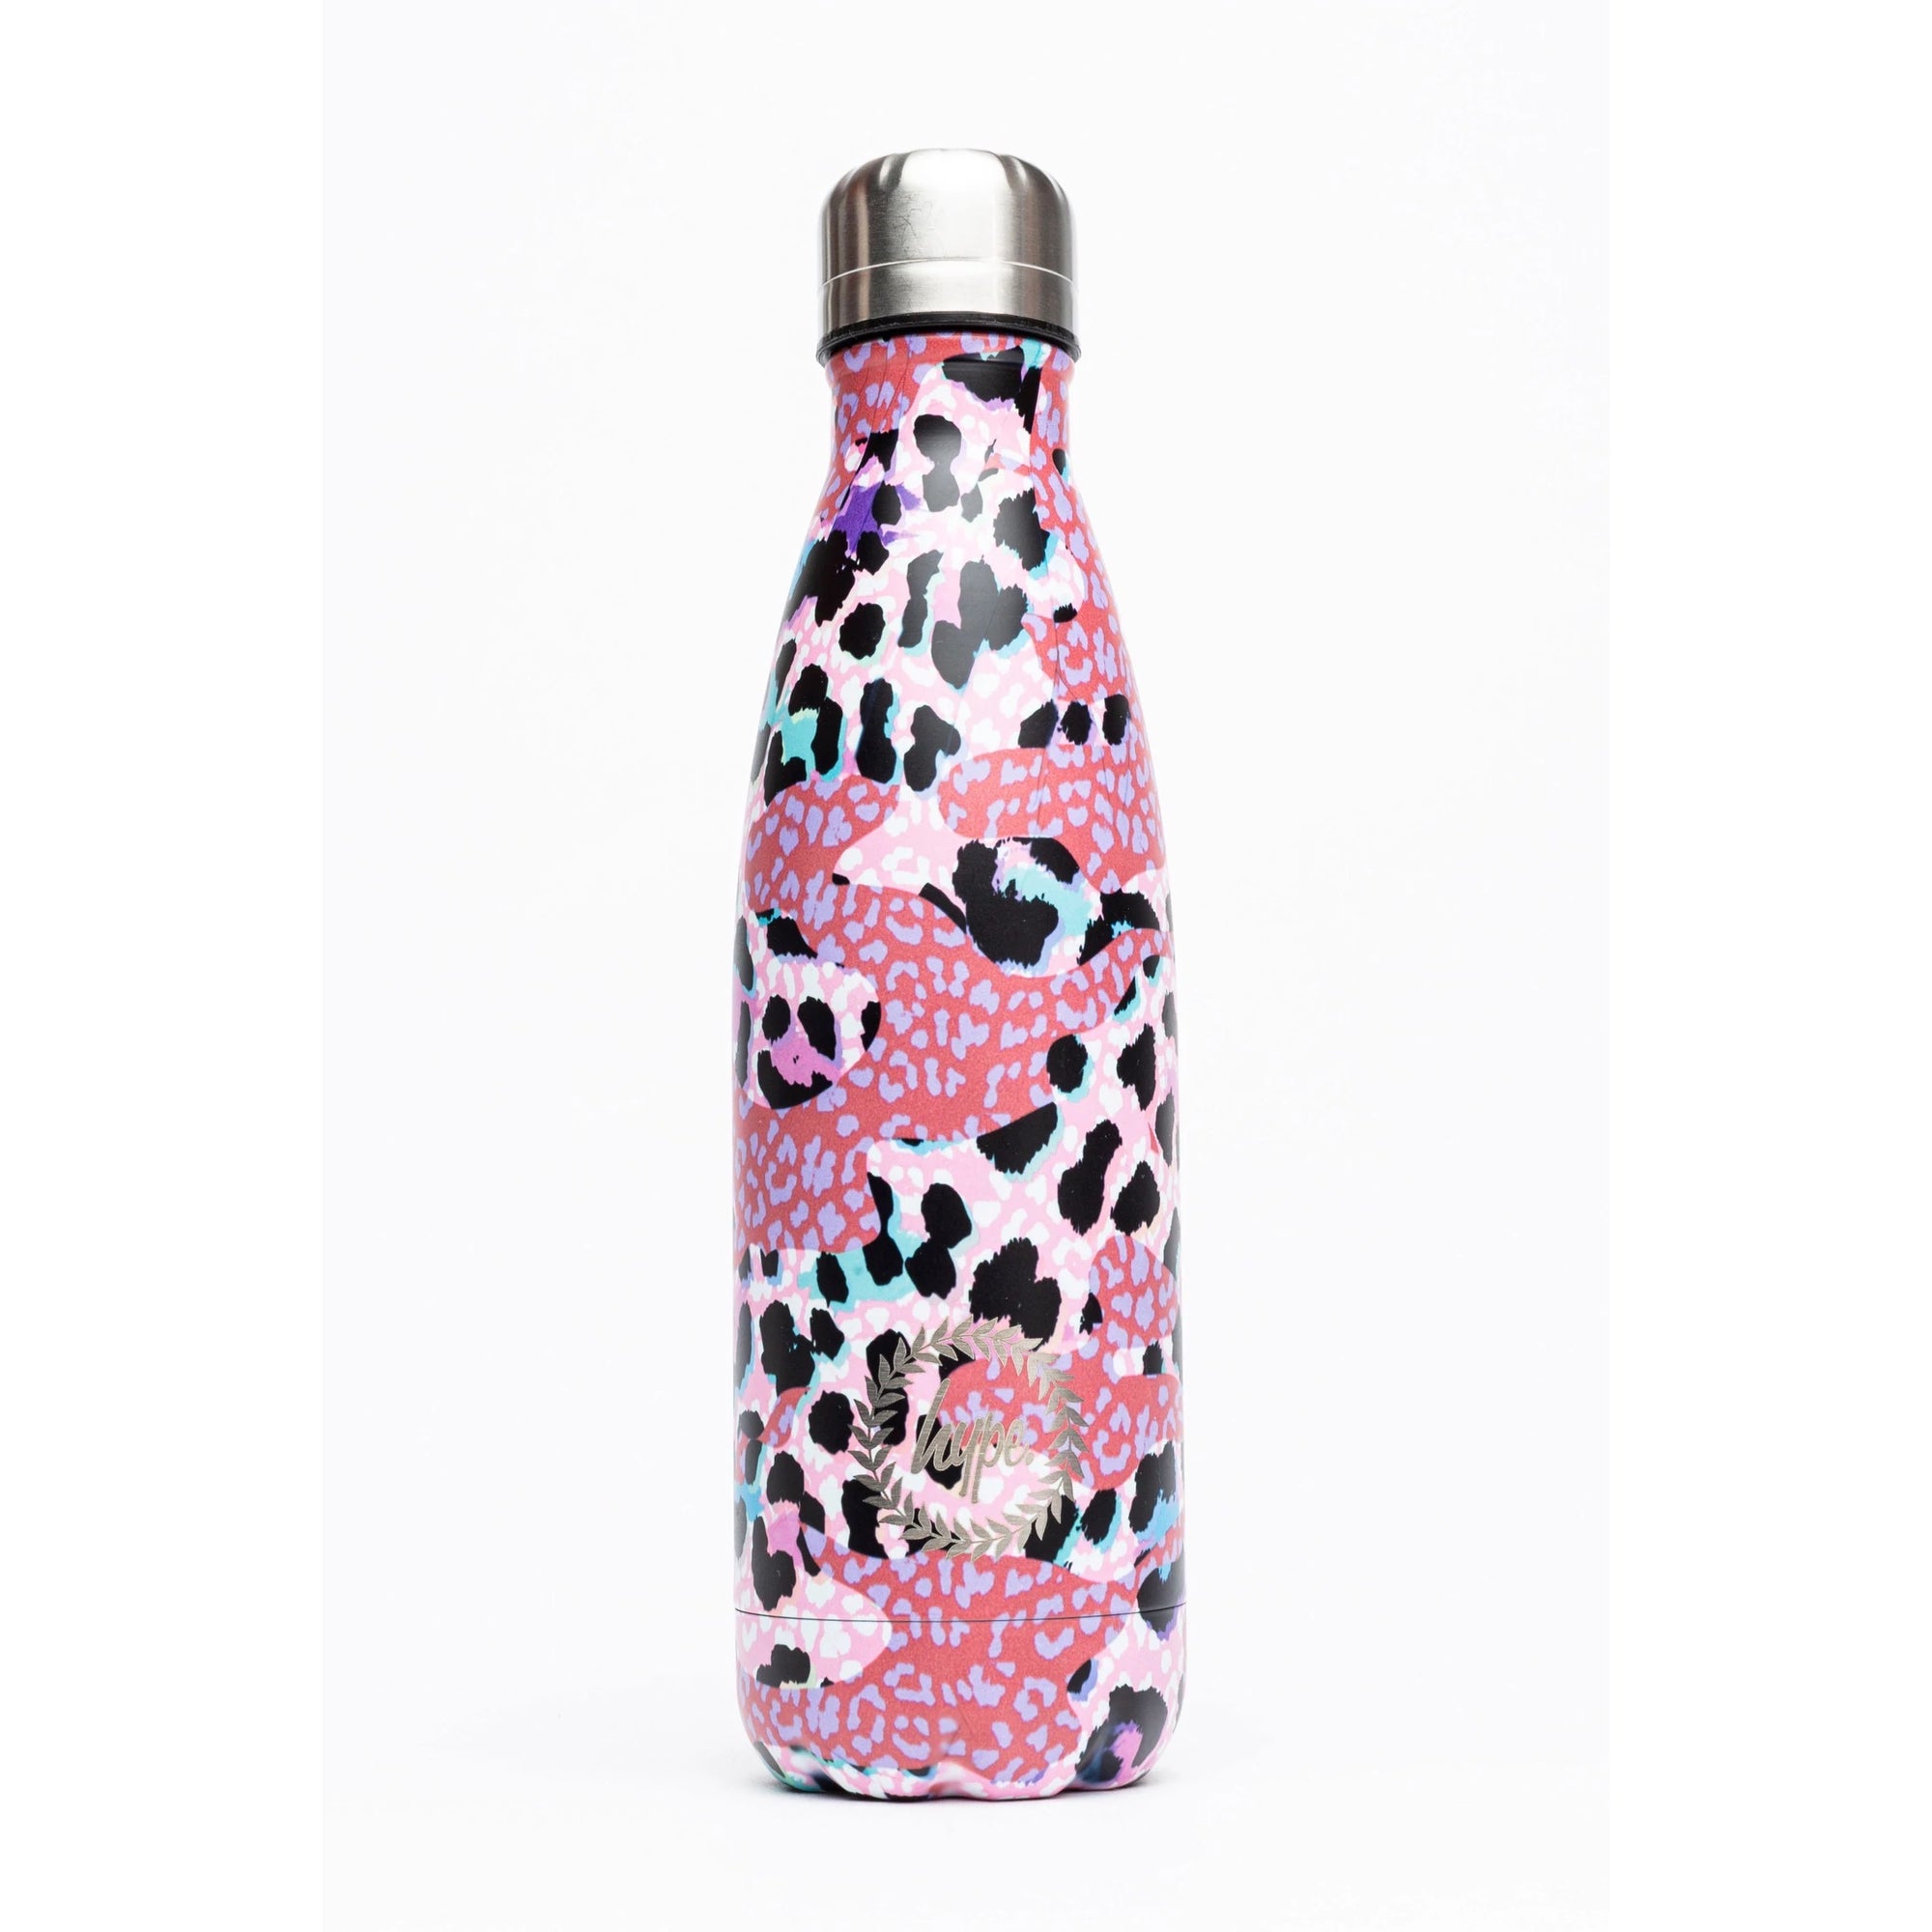 Hype Leopard Camo Bottle Zwf-842 Accessories ONE SIZE / Pink